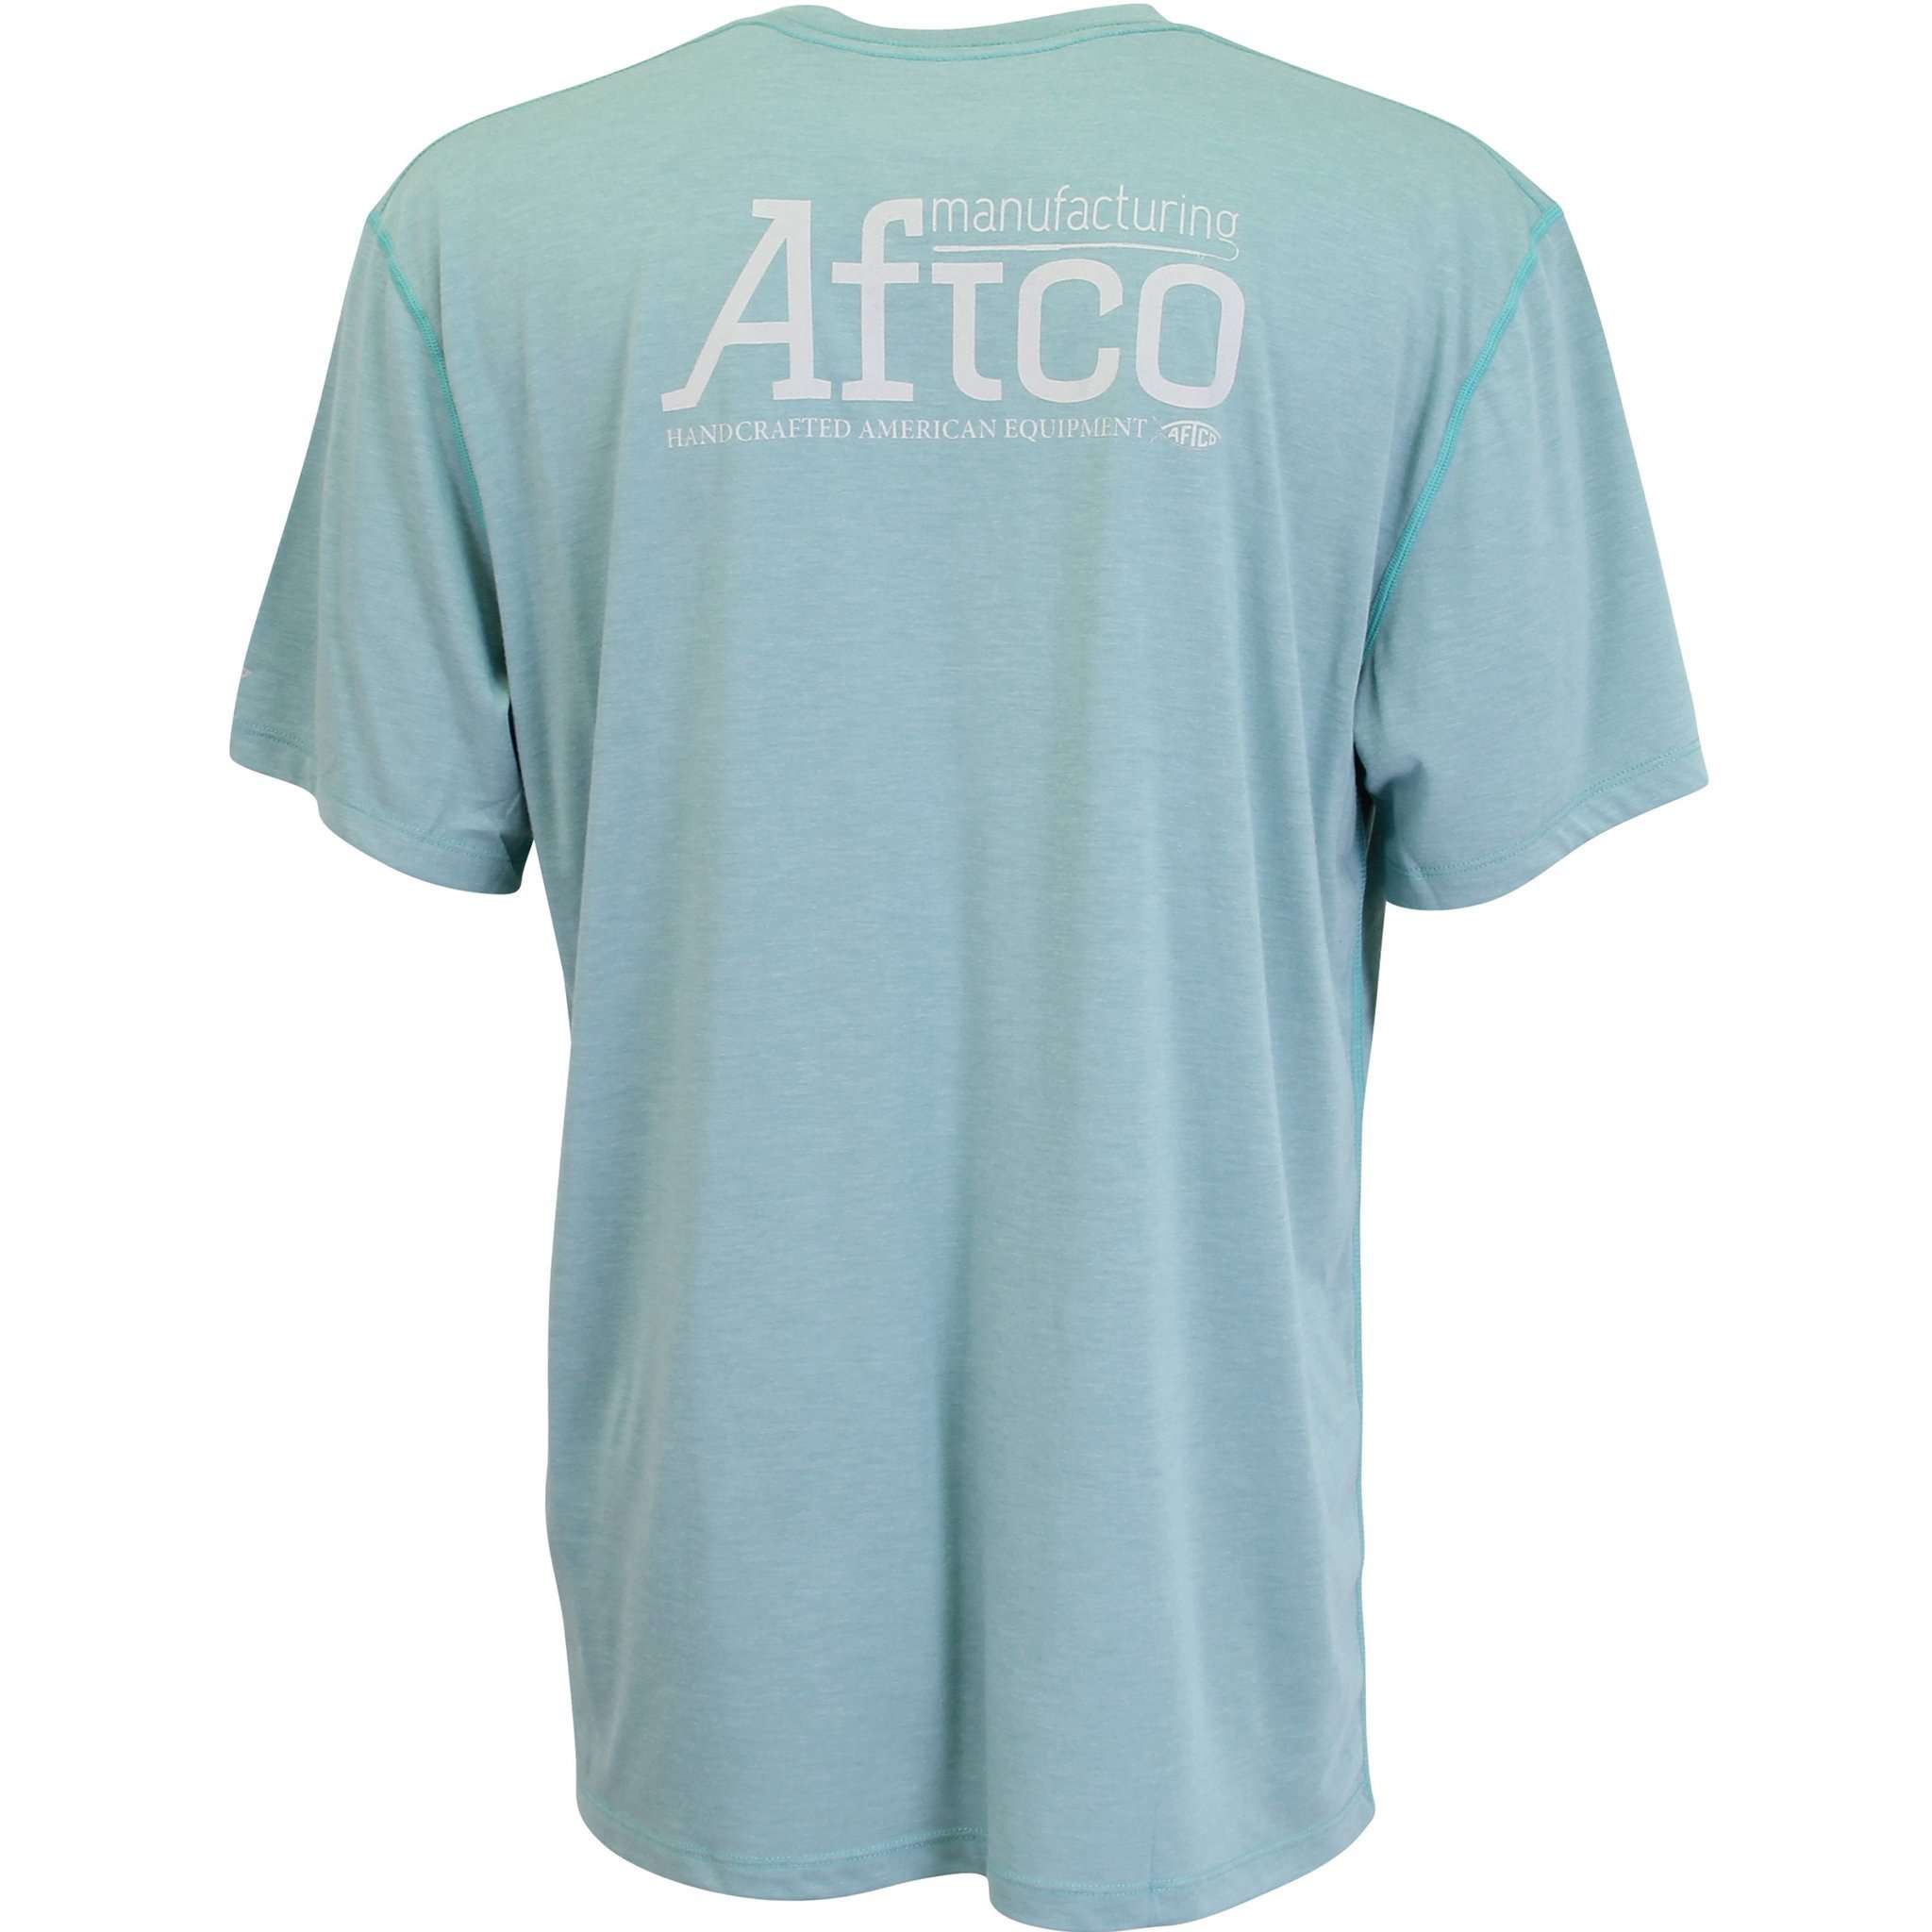 G Man Performance Tee Shirt in Menthol by AFTCO - Country Club Prep